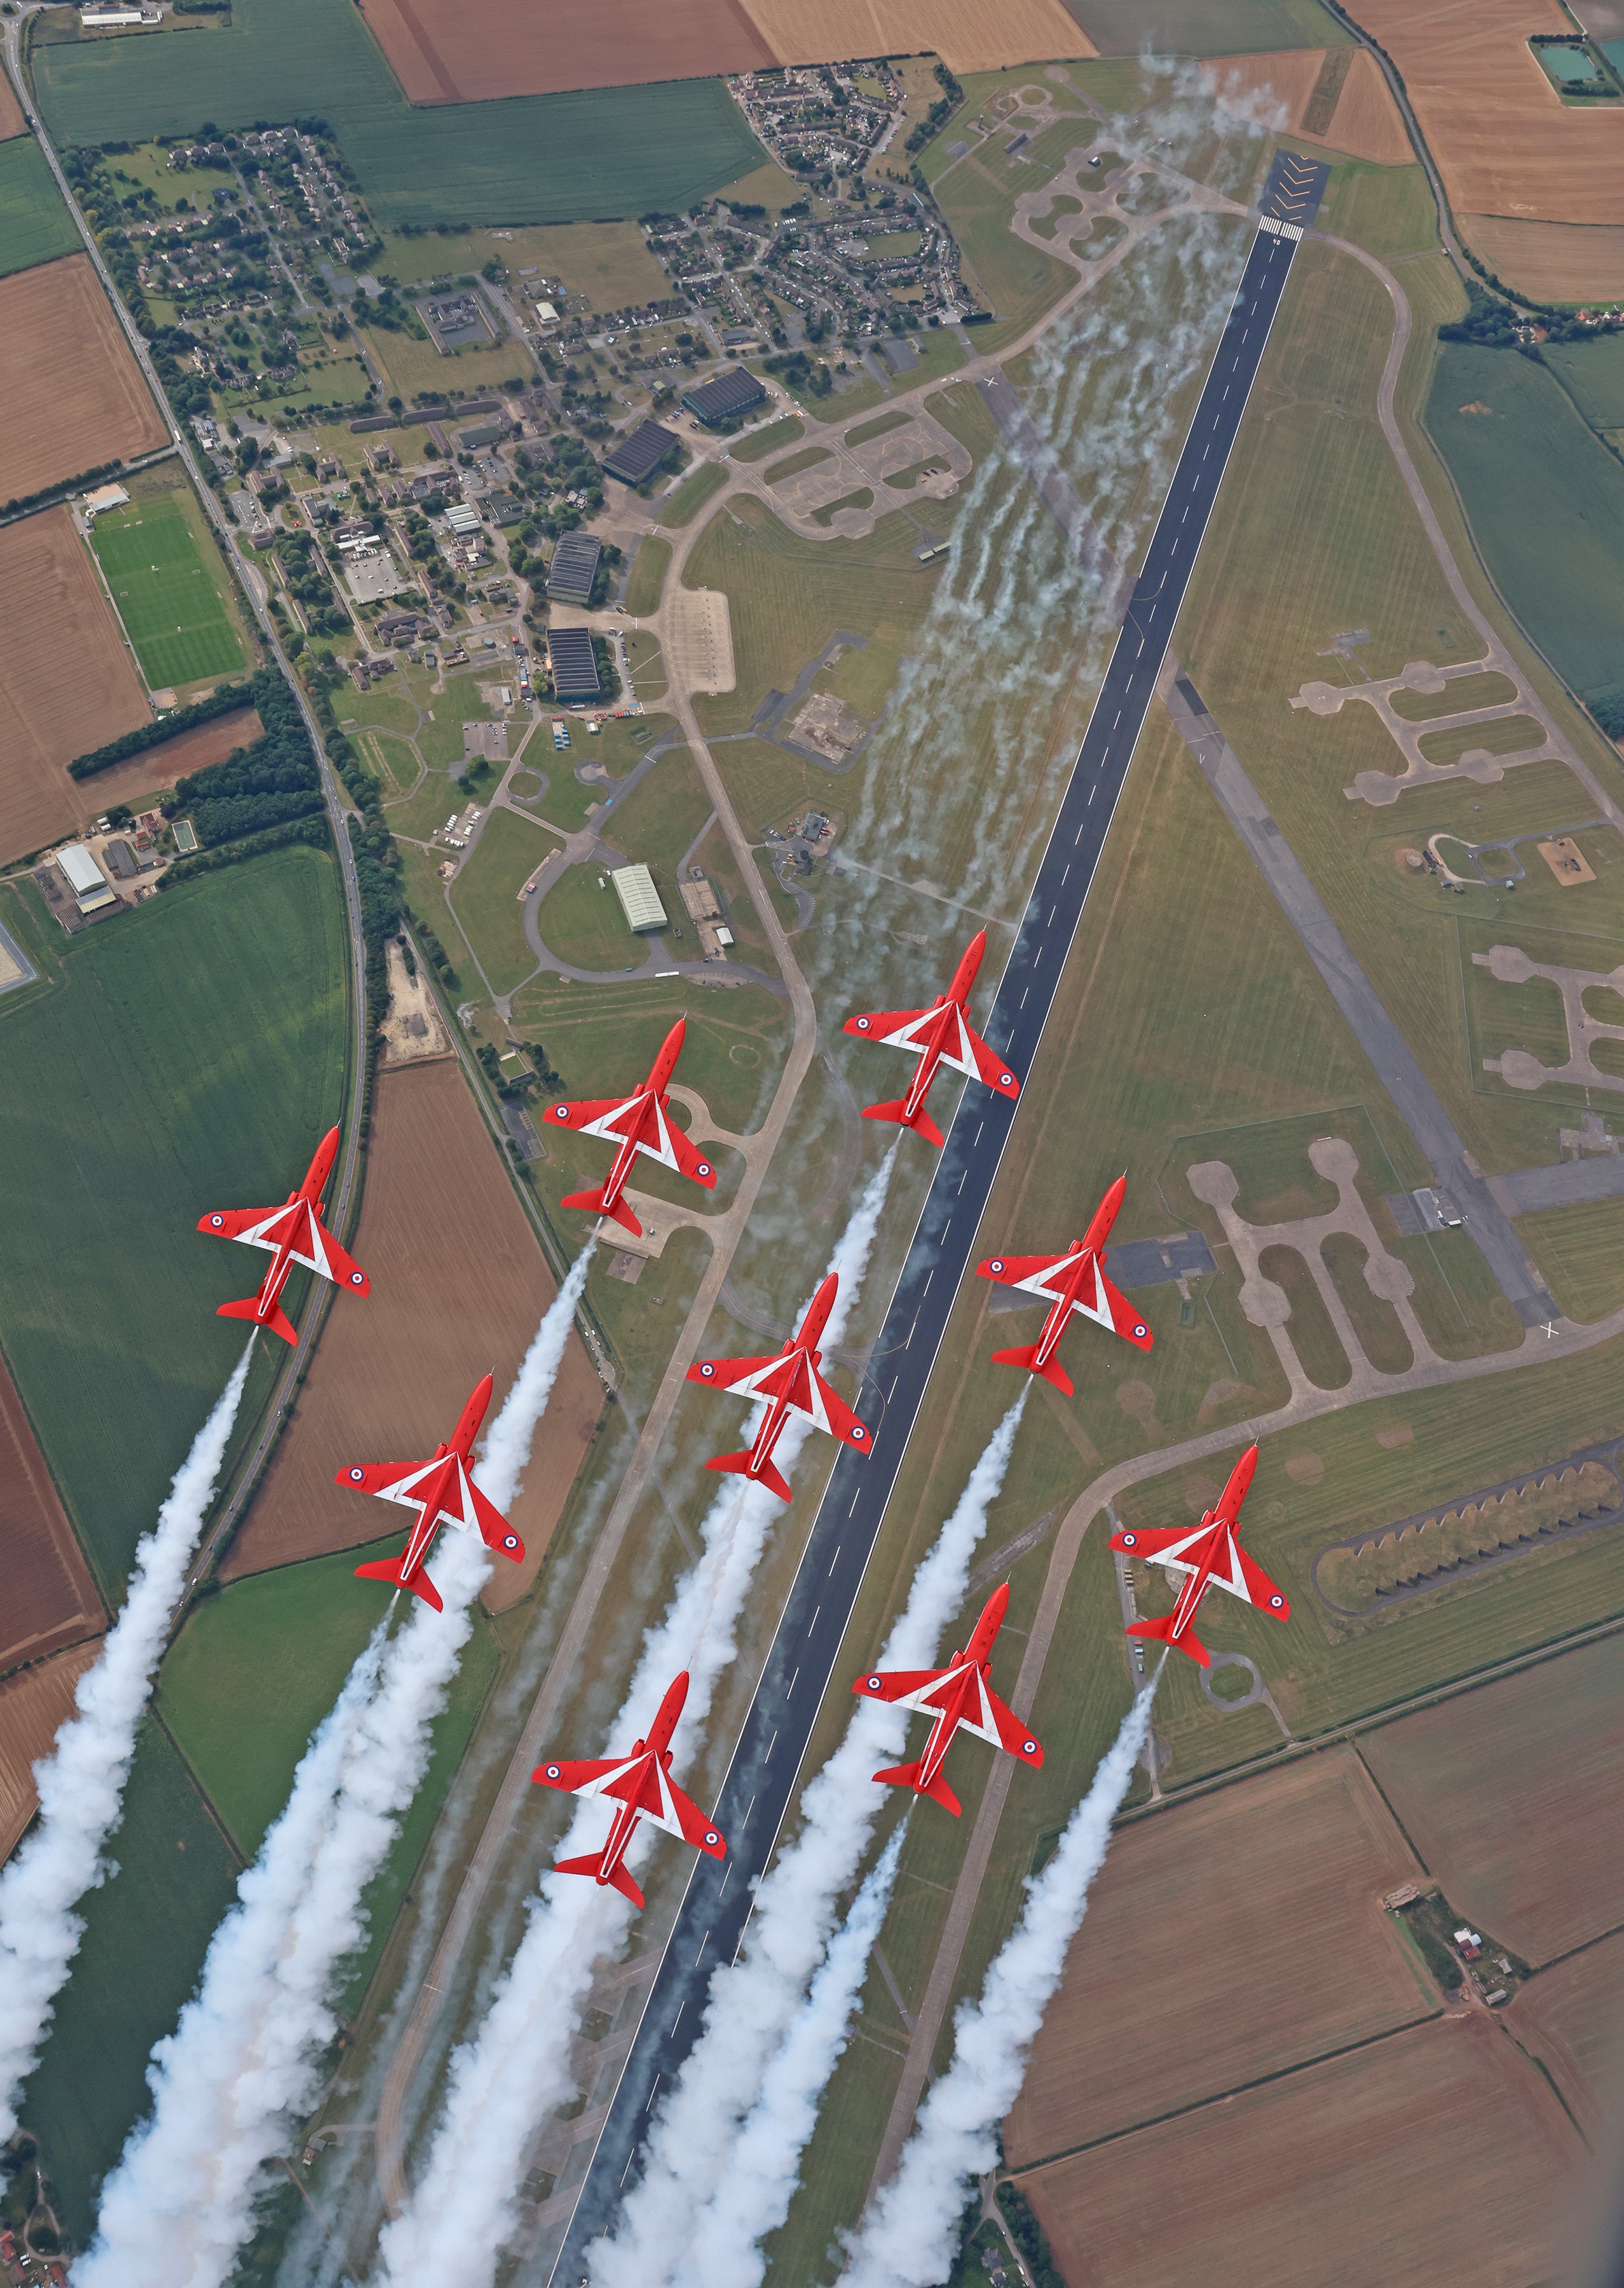 The Red Arrows returning to RAF Scampton in style after a display.